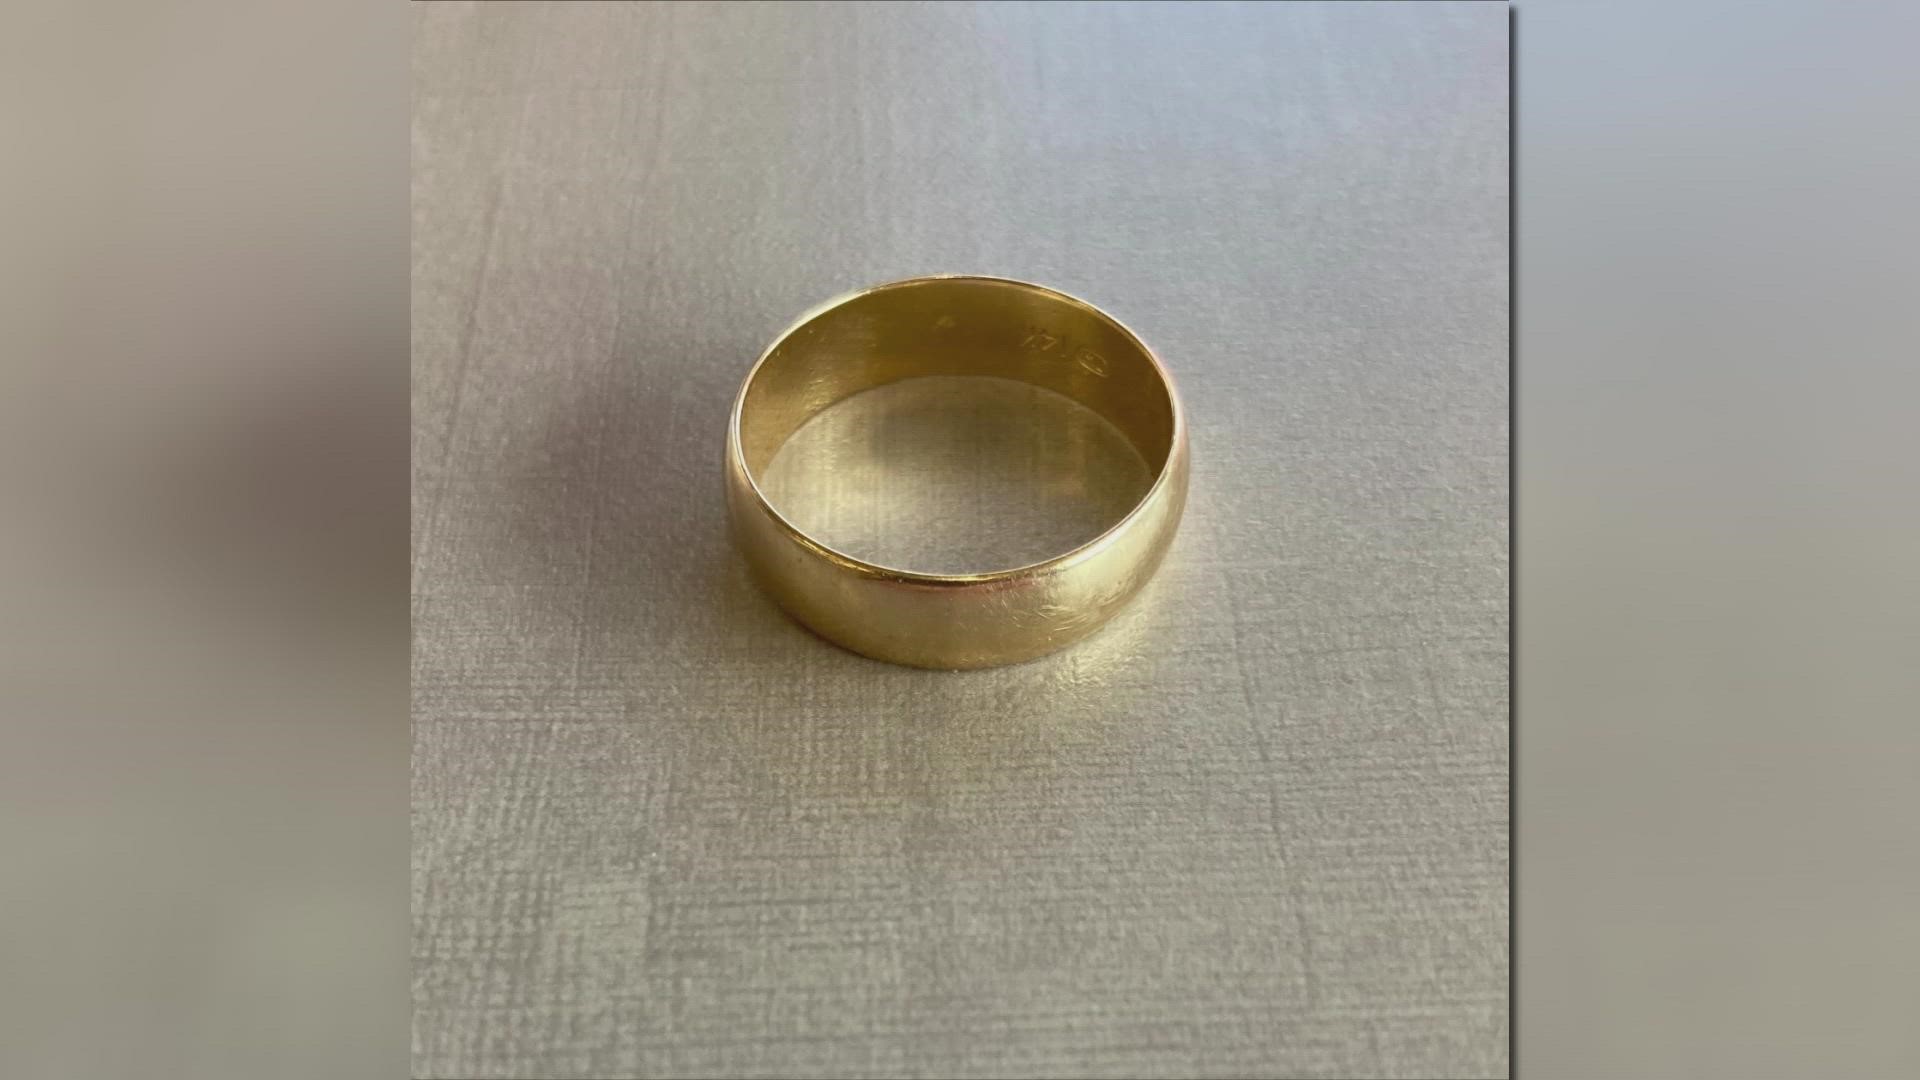 A west Knoxville man is searching for the owner of a wedding ring found at Dairy Queen.